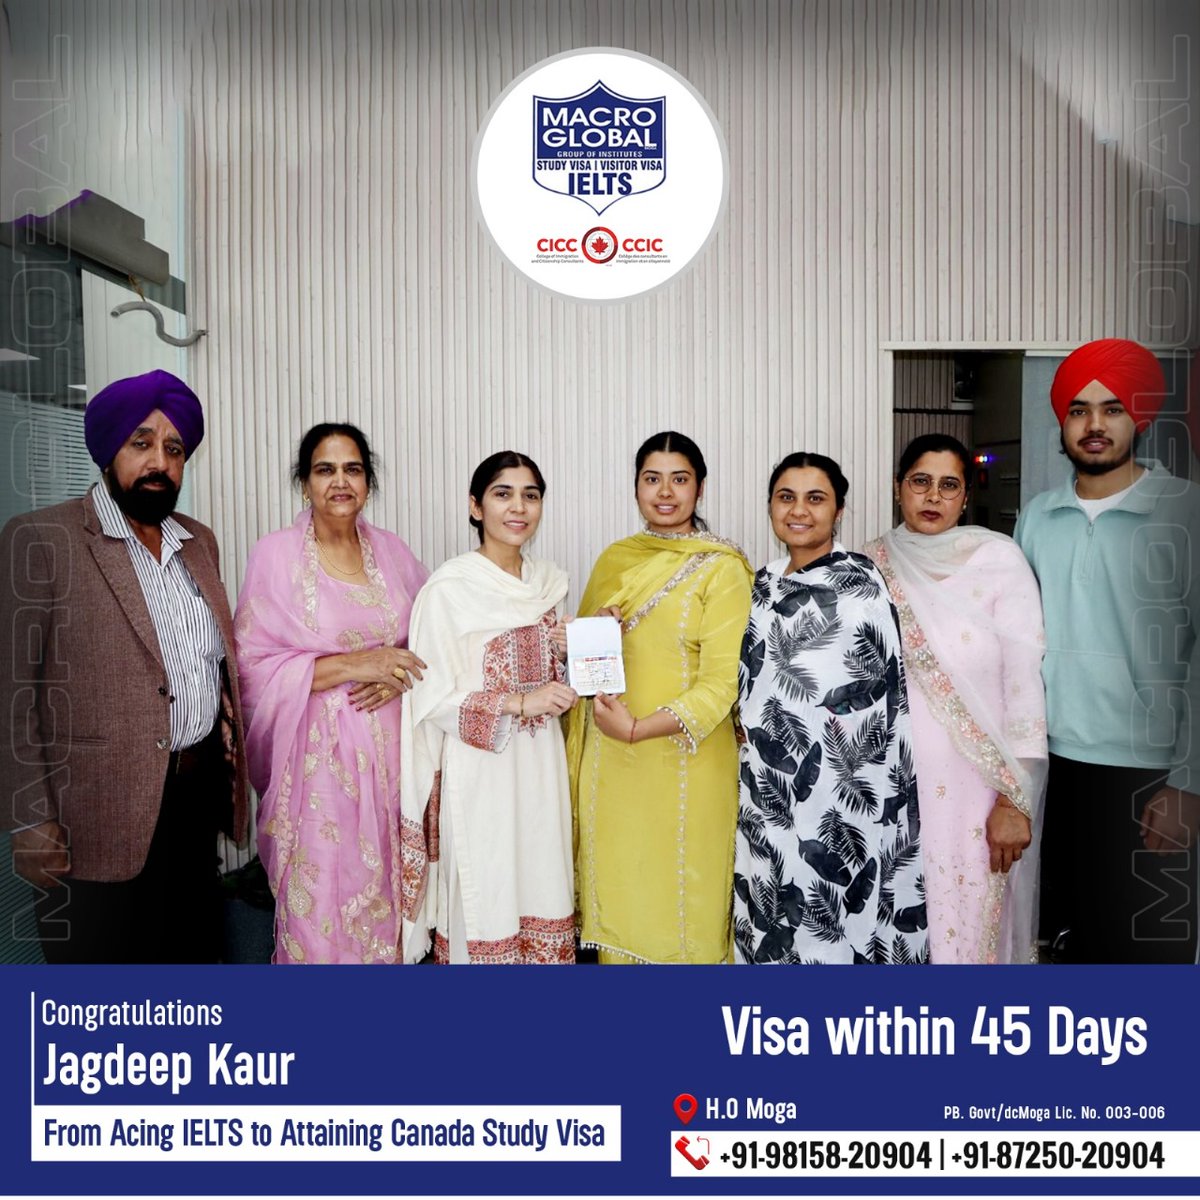 Congratulations, Jagdeep Kaur! Your Canada study visa is officially in your hands, in just 45 days!

#GurmilapSinghDalla #Canada #Canadastudyvisa #canadaopenworkpermit #spousevisa #Visitorvisa #Visa #IELTS #IELTSTraining #EnrollNow #Immigration #immigrationlawyer #Moga